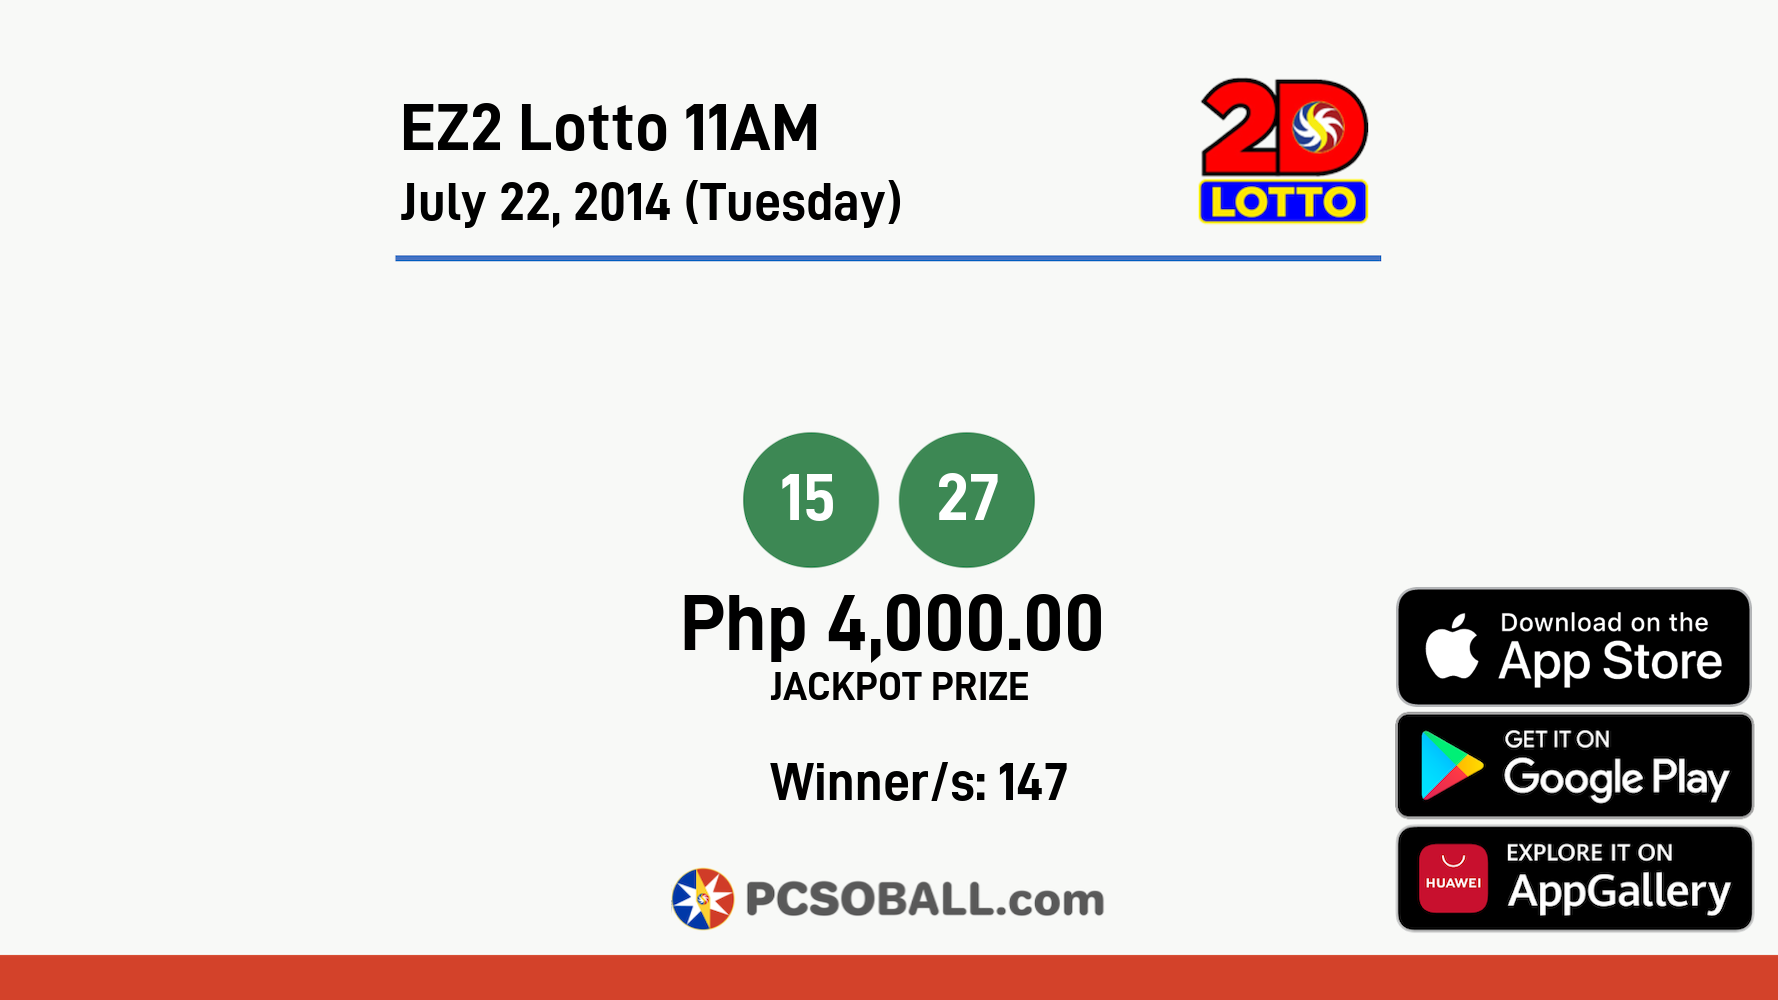 EZ2 Lotto 11AM July 22, 2014 (Tuesday) Result